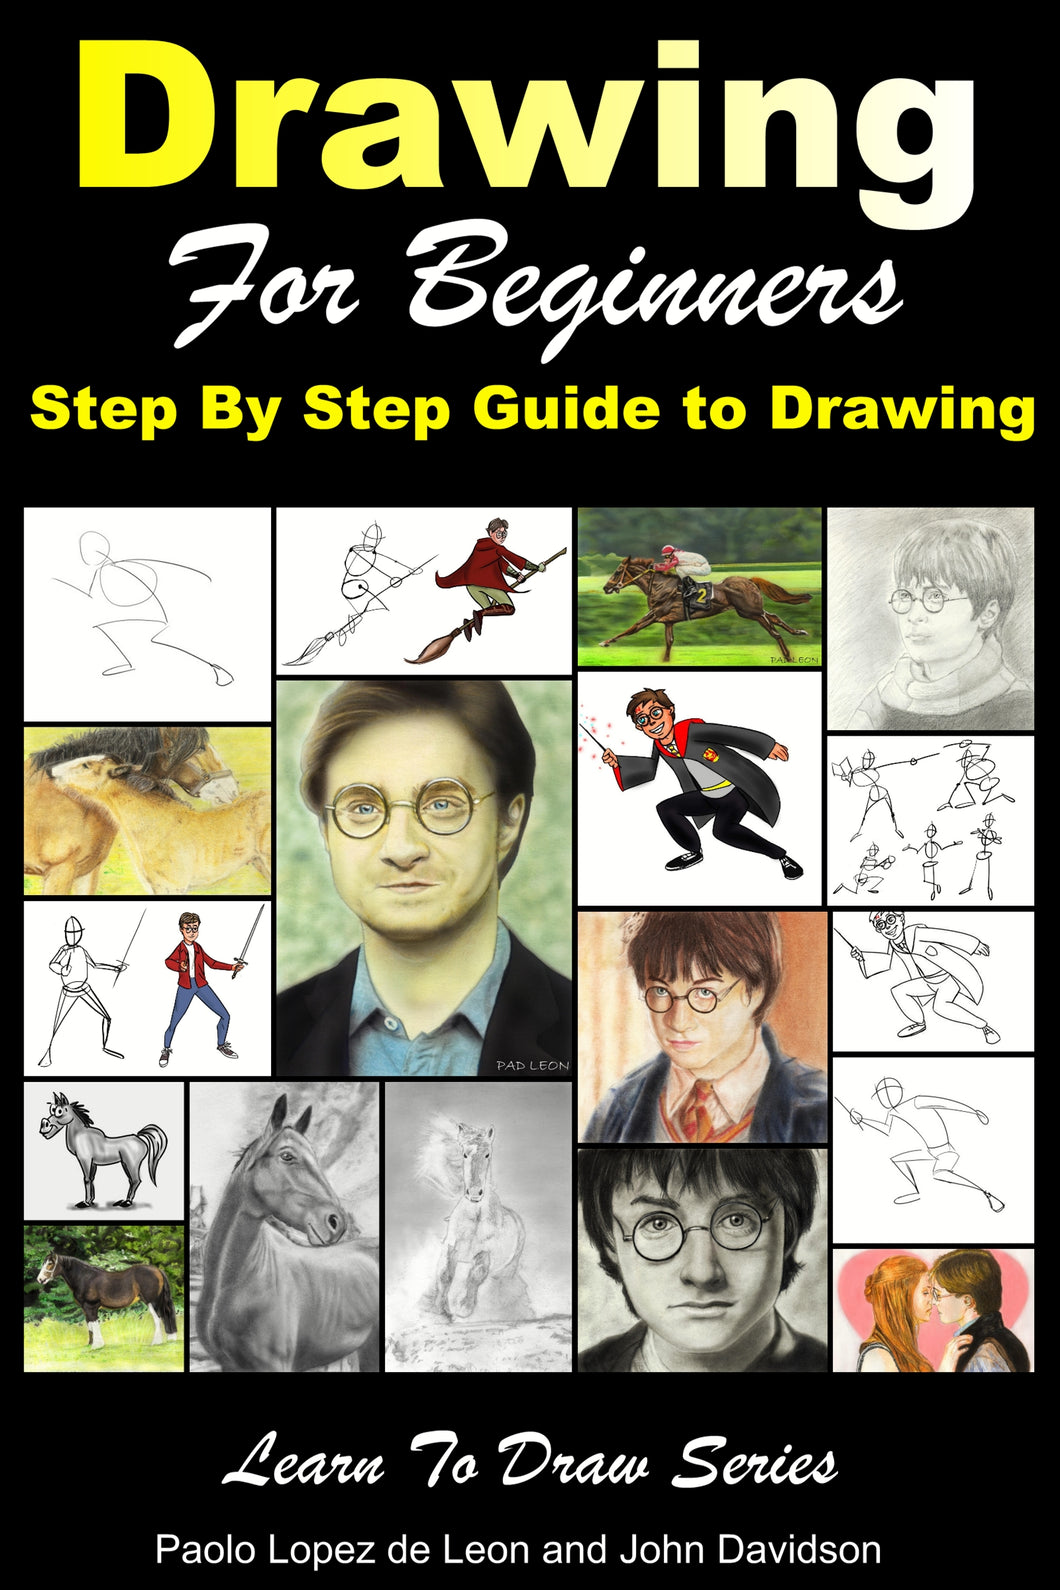 Top 7 Cute Drawing Ideas for Beginners